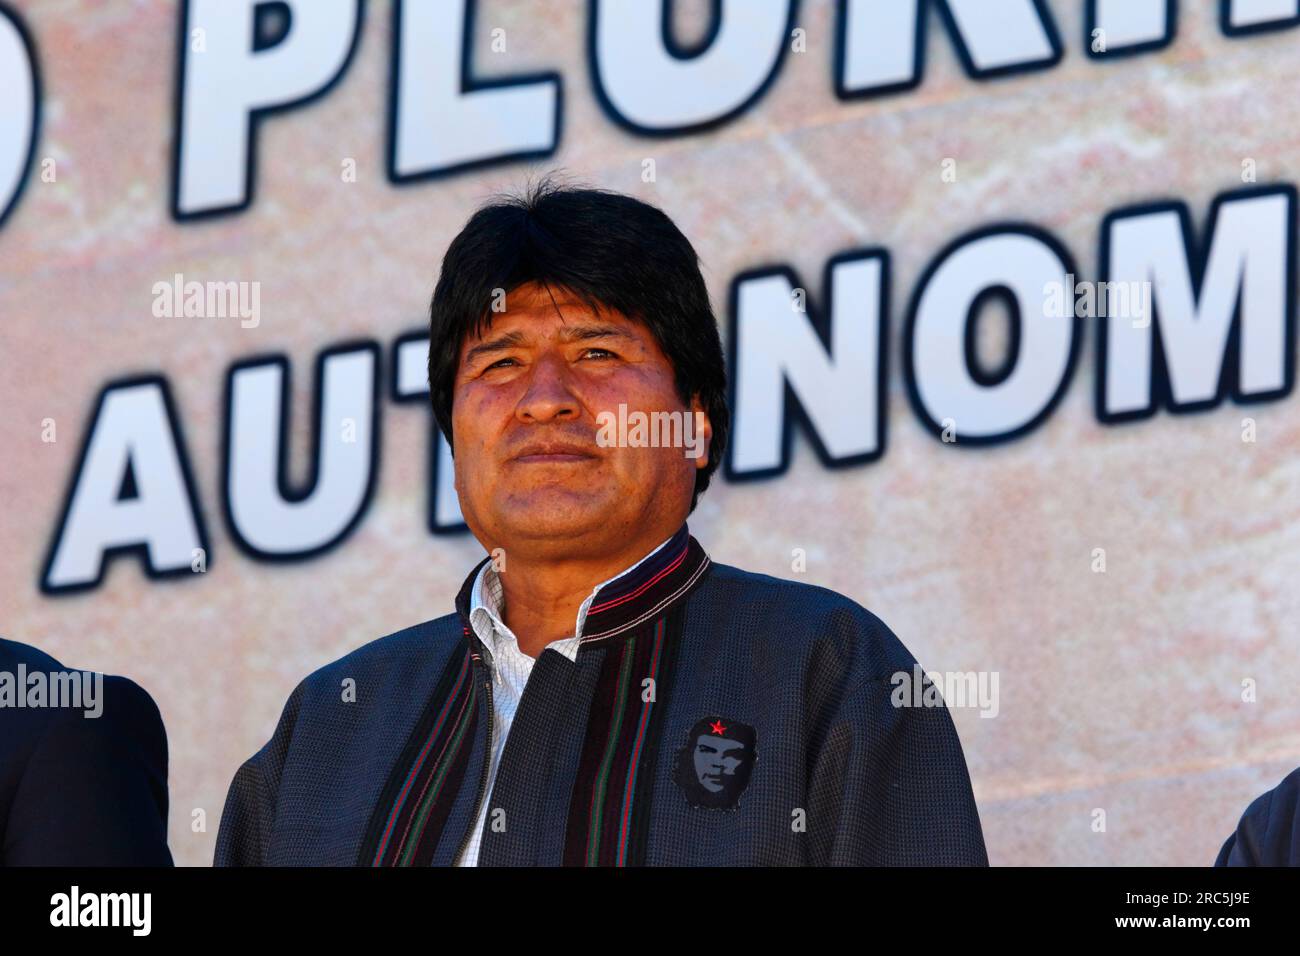 LA PAZ, BOLIVIA, 14th January. Bolivian president Evo Morales Ayma (a former coca grower and union leader) wears a jacket with a badge of Che Guevara on it while taking part in an event to celebrate Bolivia rejoining the 1961 UN Single Convention on Narcotic Drugs. Evo's expression and pose in this shot is similar to that of Che in the iconic  'El Guerrillero Heroico' photo taken by photographer Alberto Korda in 1960, which is the basis for the ubiquitous modern images of Che (including the badge on Evo's jacket). Stock Photo